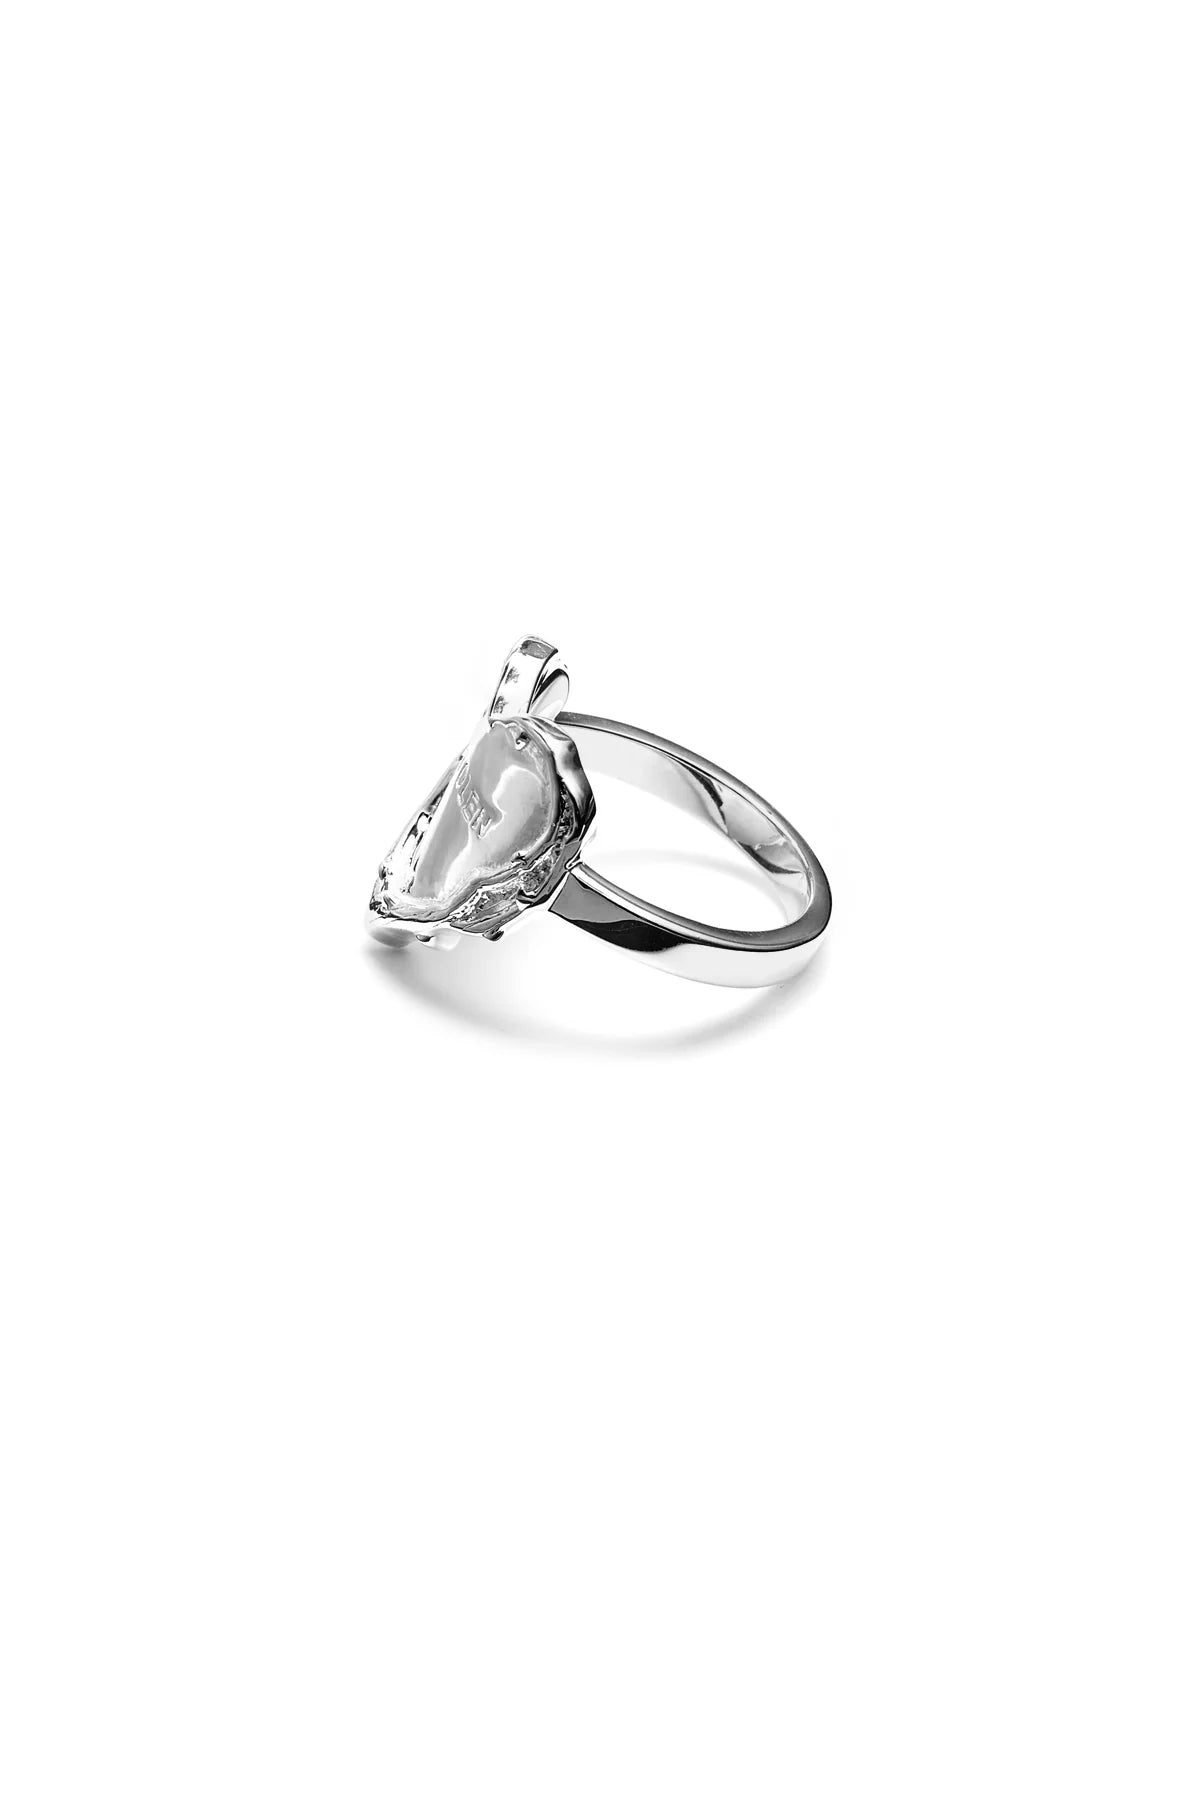 Stolen Girlfriends Club Thorned Heart Ring Stirling Silver